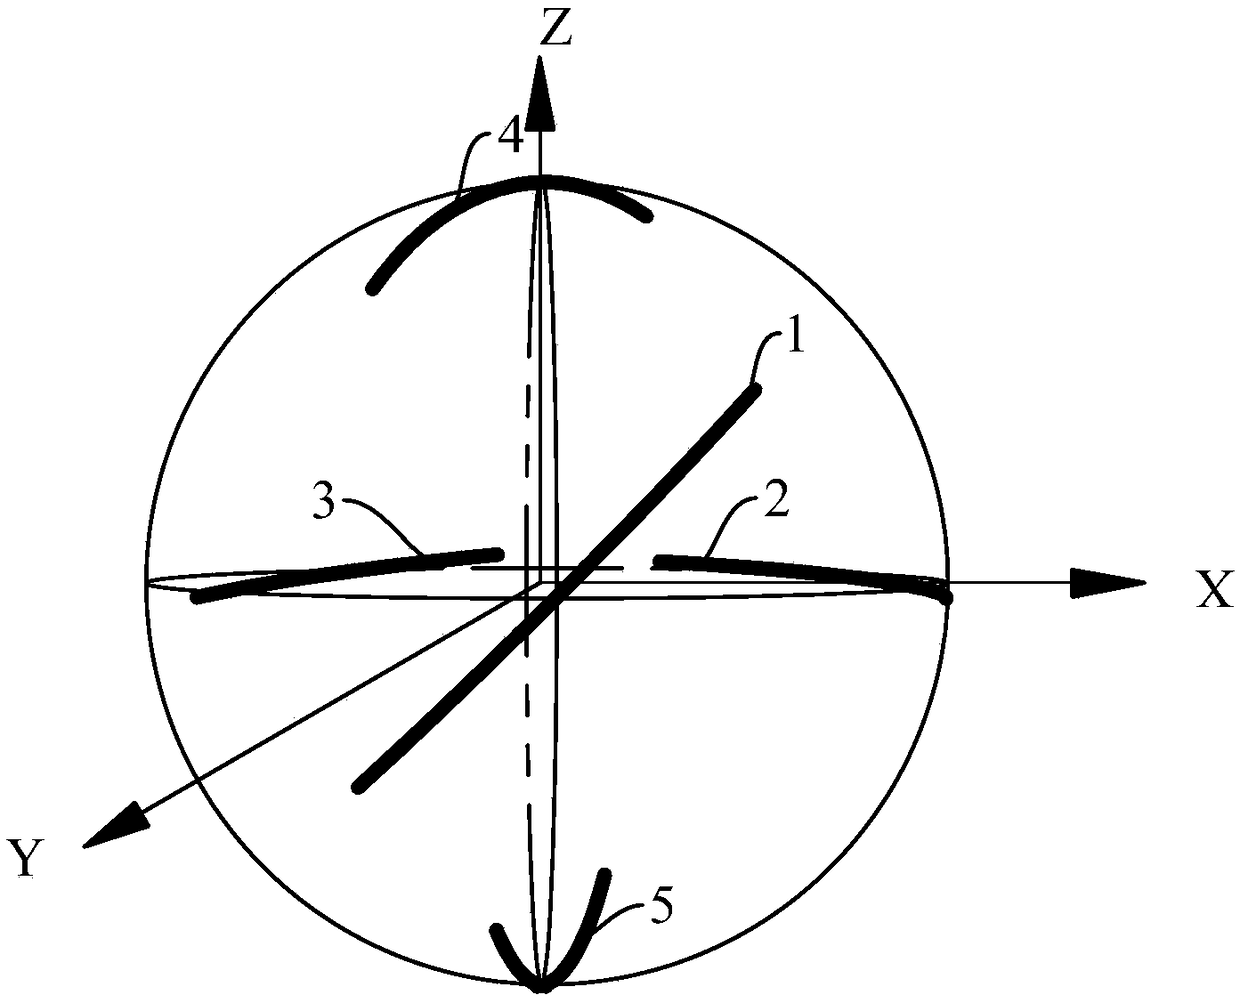 Detecting method of sphere and its high-speed rotating motion parameters